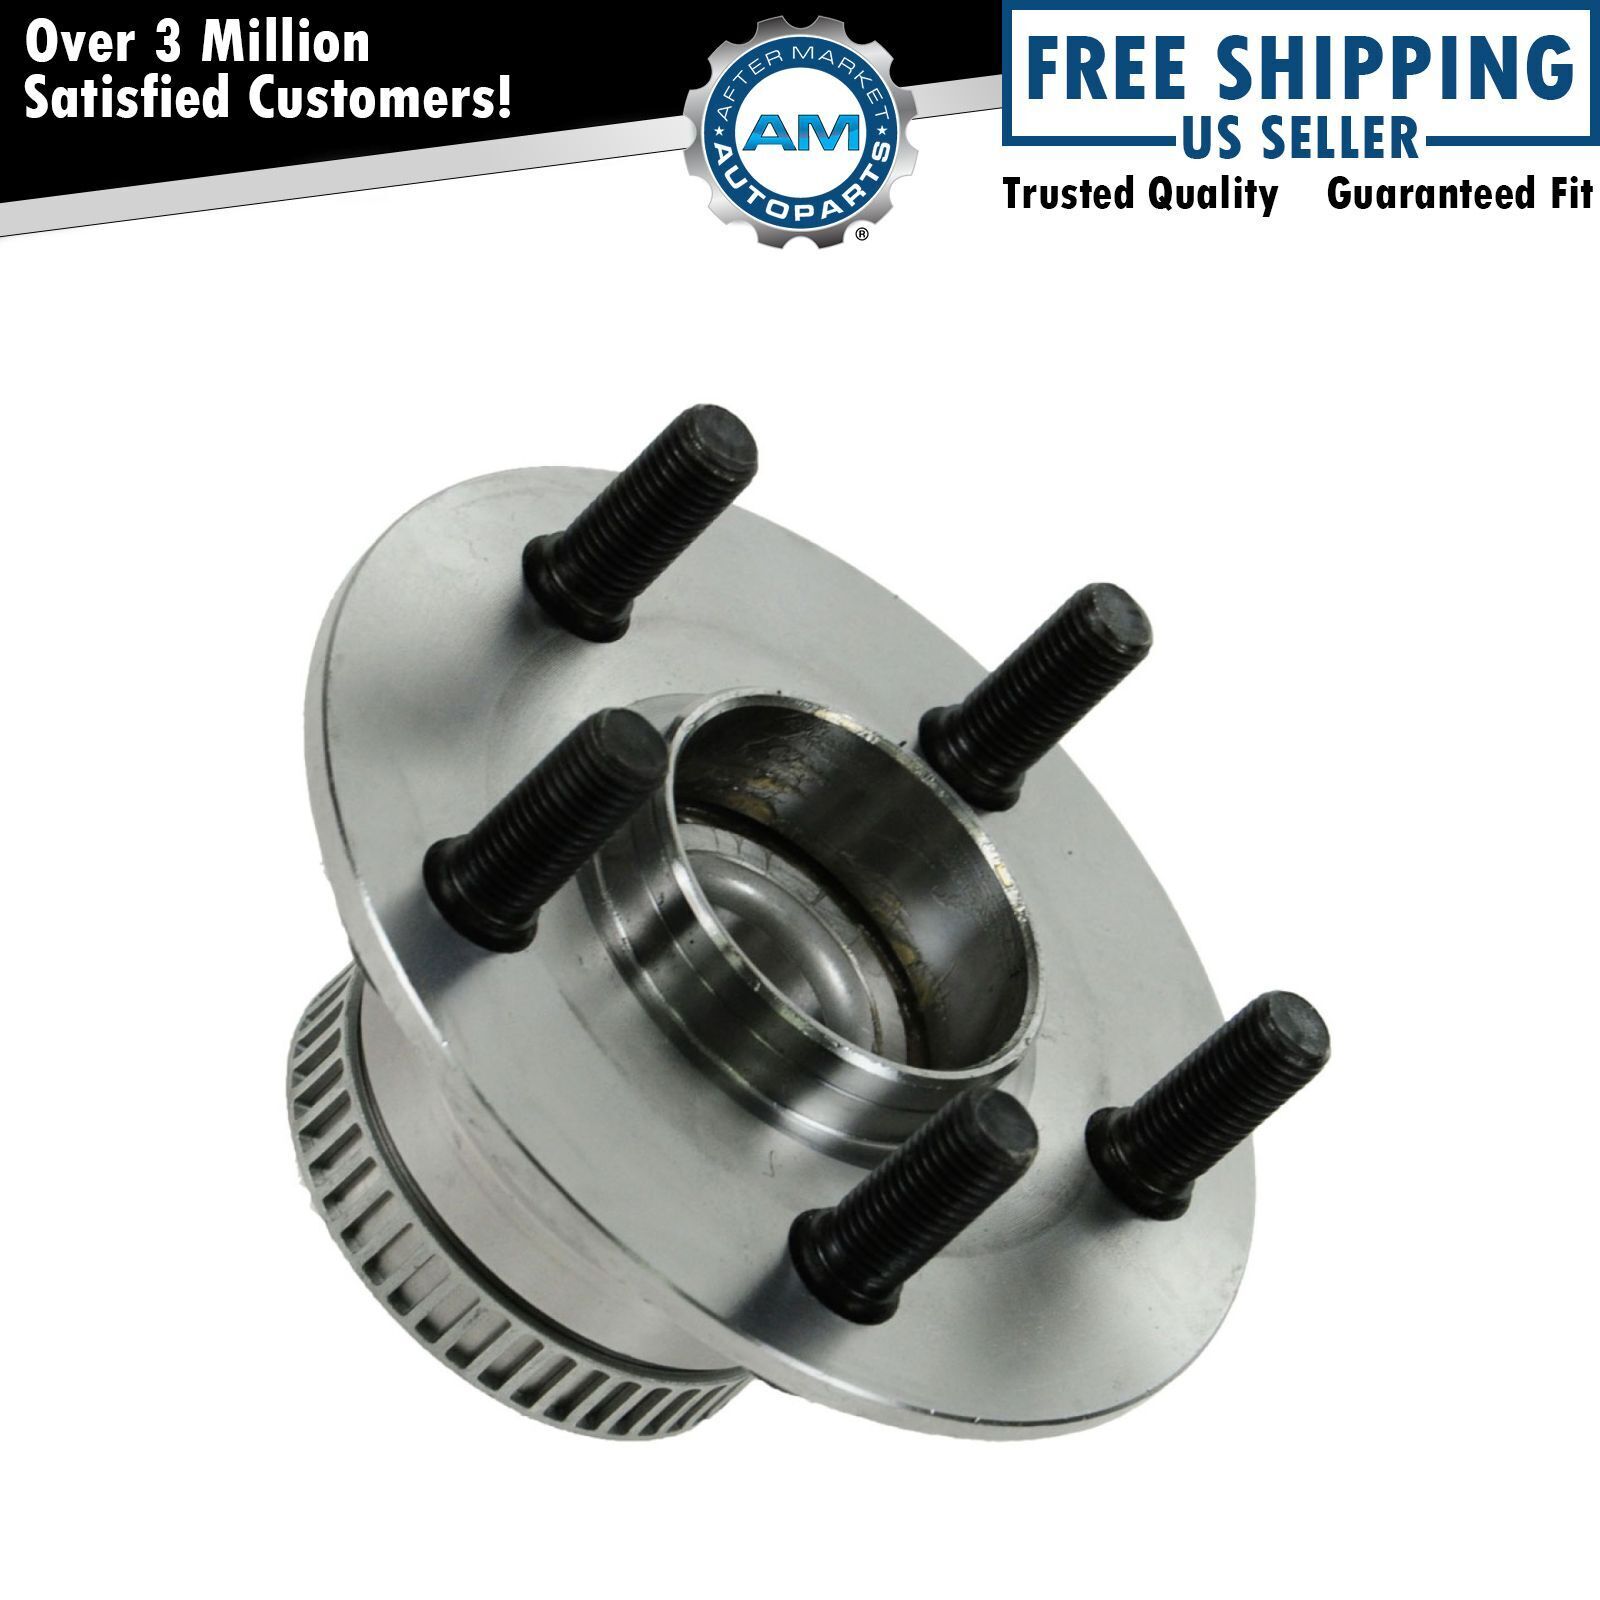 New Rear Wheel Hub and Bearing Assembly for Neon PT Cruiser w/ABS